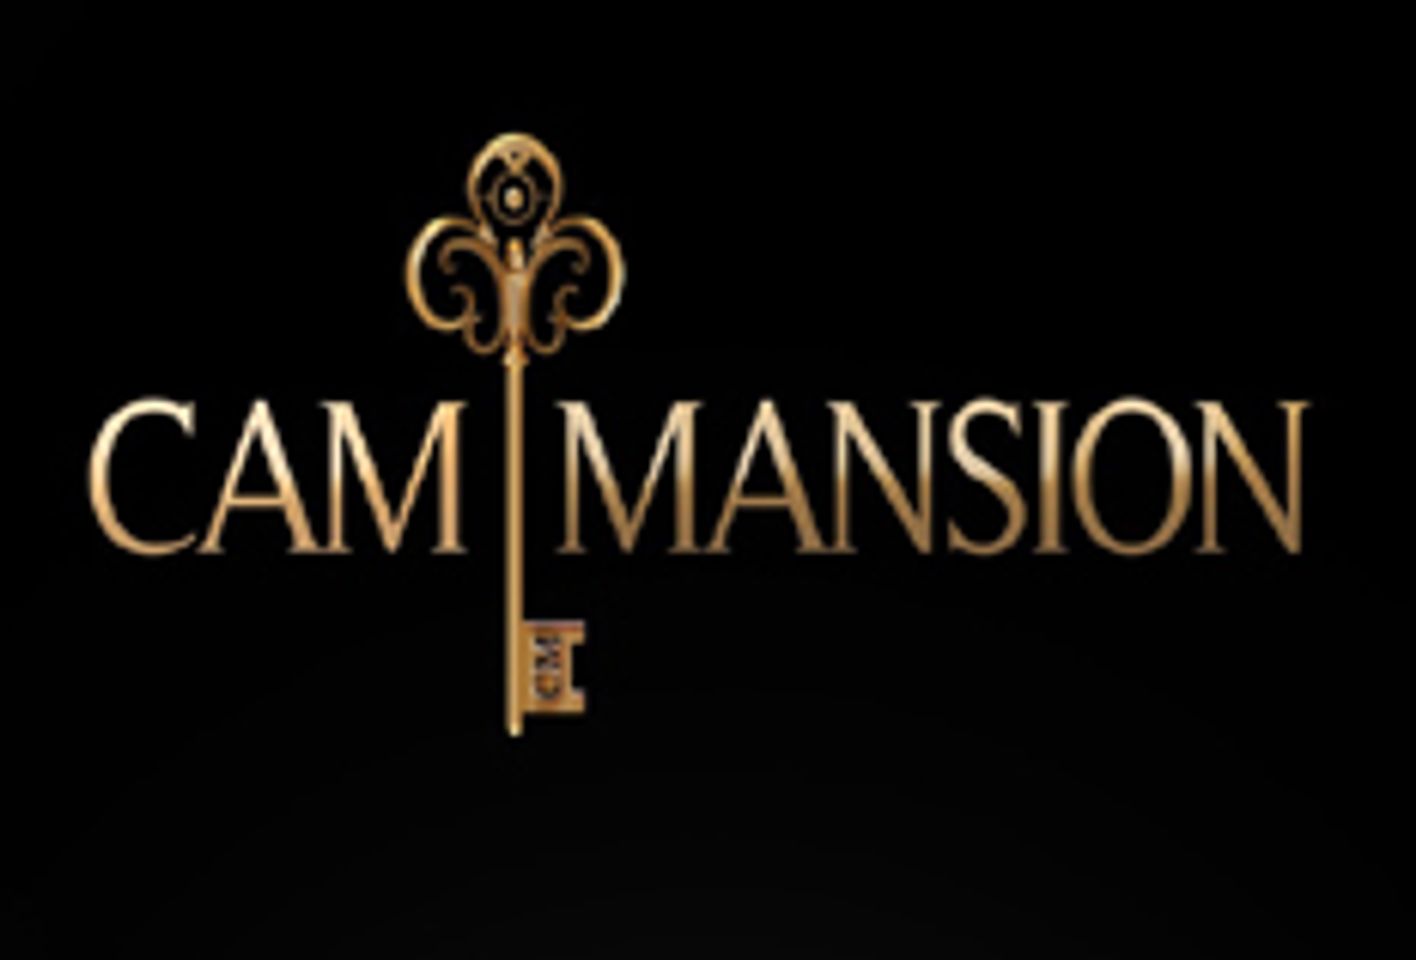 CamMansion.com Brings High-Tech Style to the World